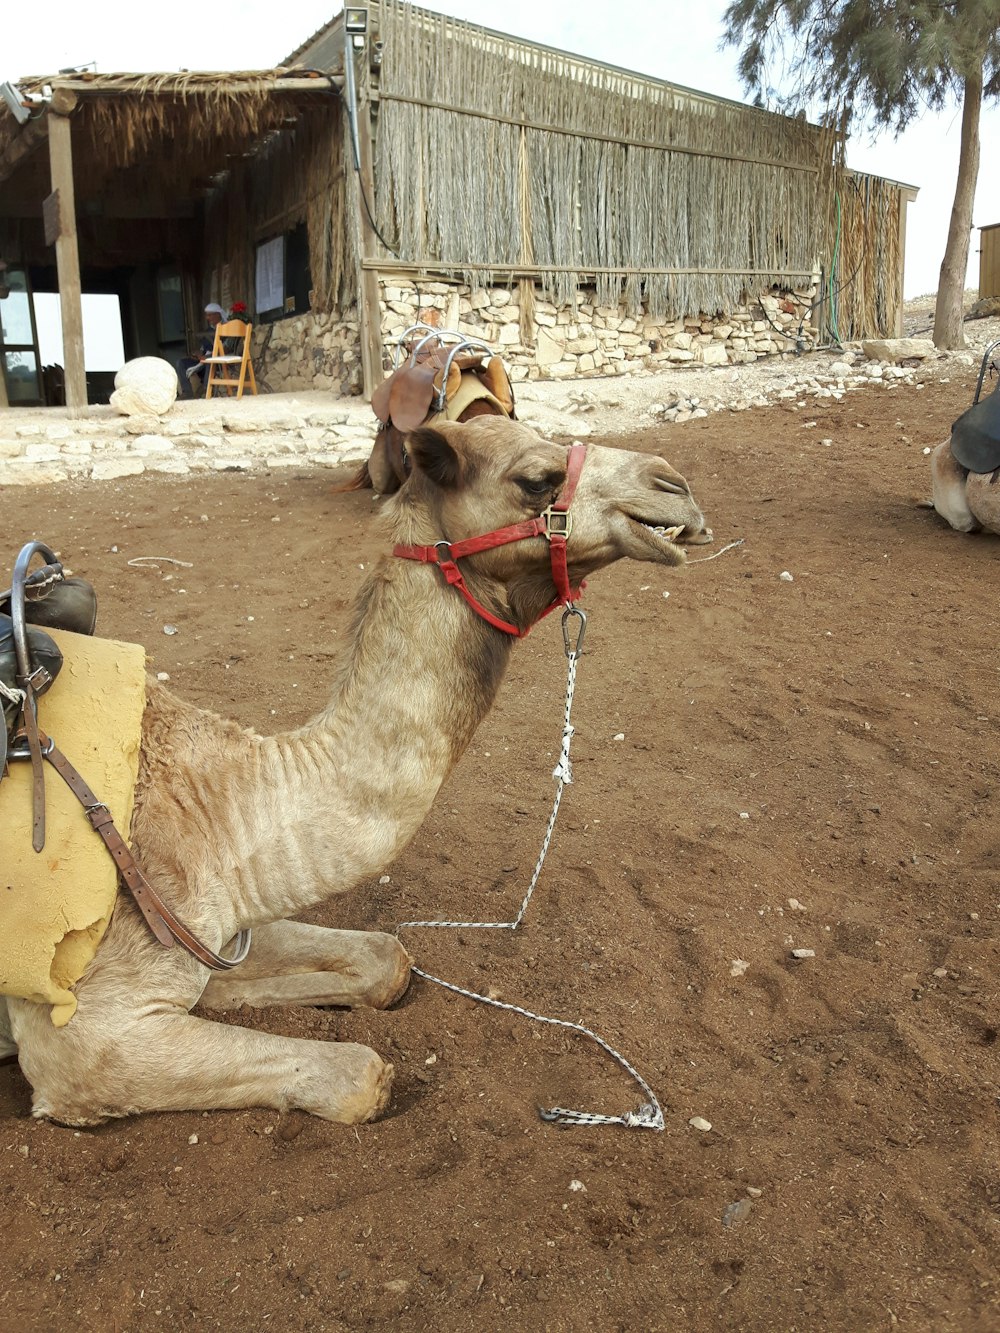 a camel laying on the ground with a saddle on its back